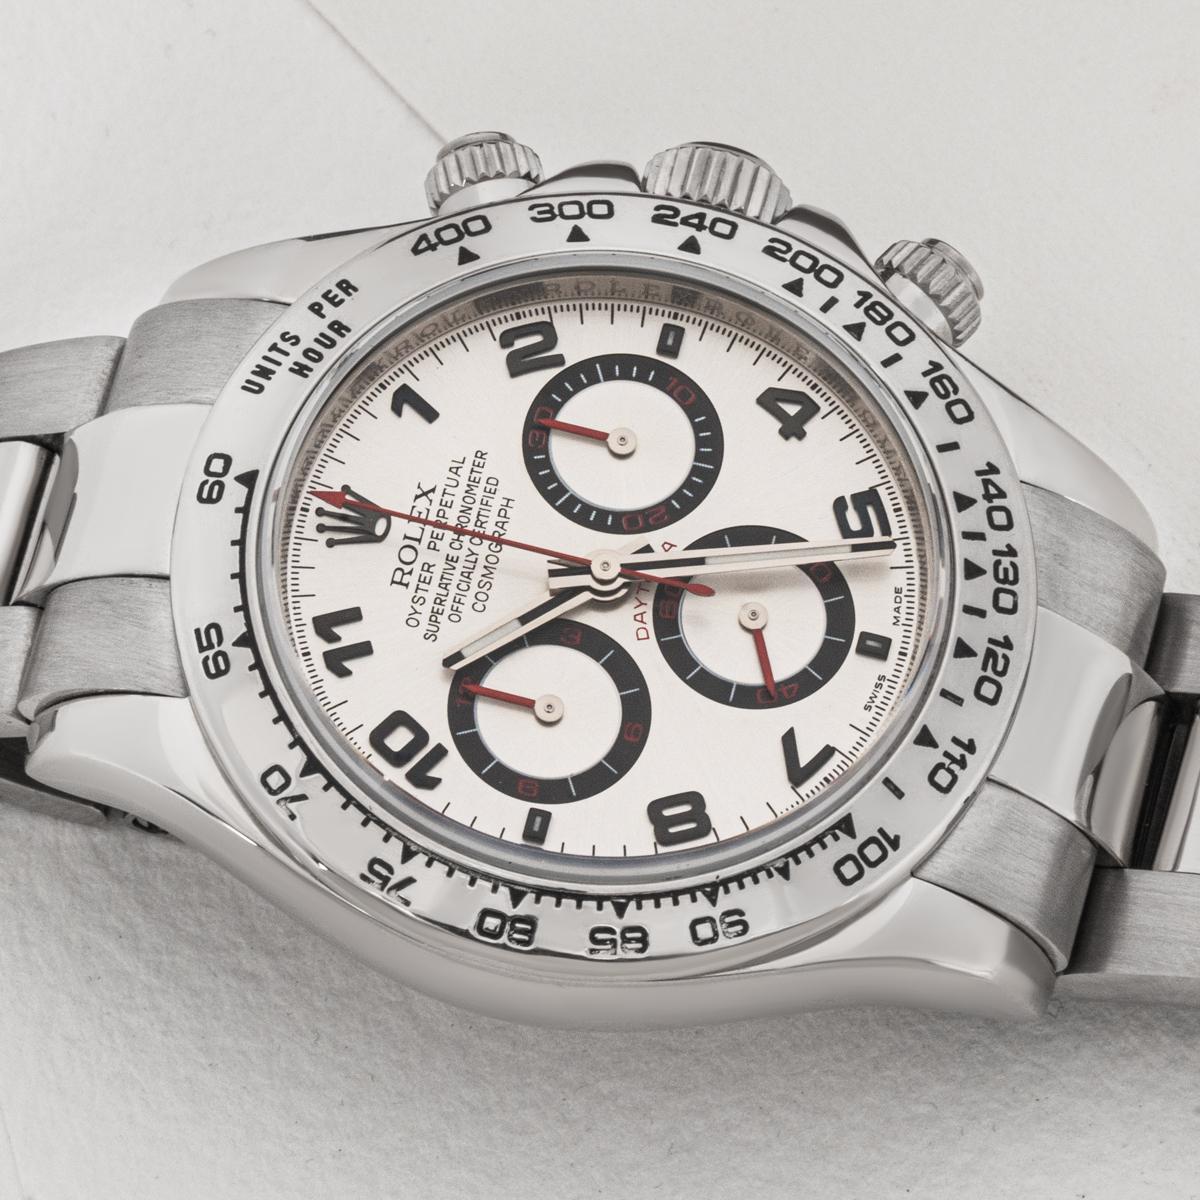 A Cosmograph Daytona crafted in white gold by Rolex. Featuring a silver racing dial with red detailing. Like all Daytona's this model features a tachymetric scale, three counters and three pushers, making it the ultimate high-performance